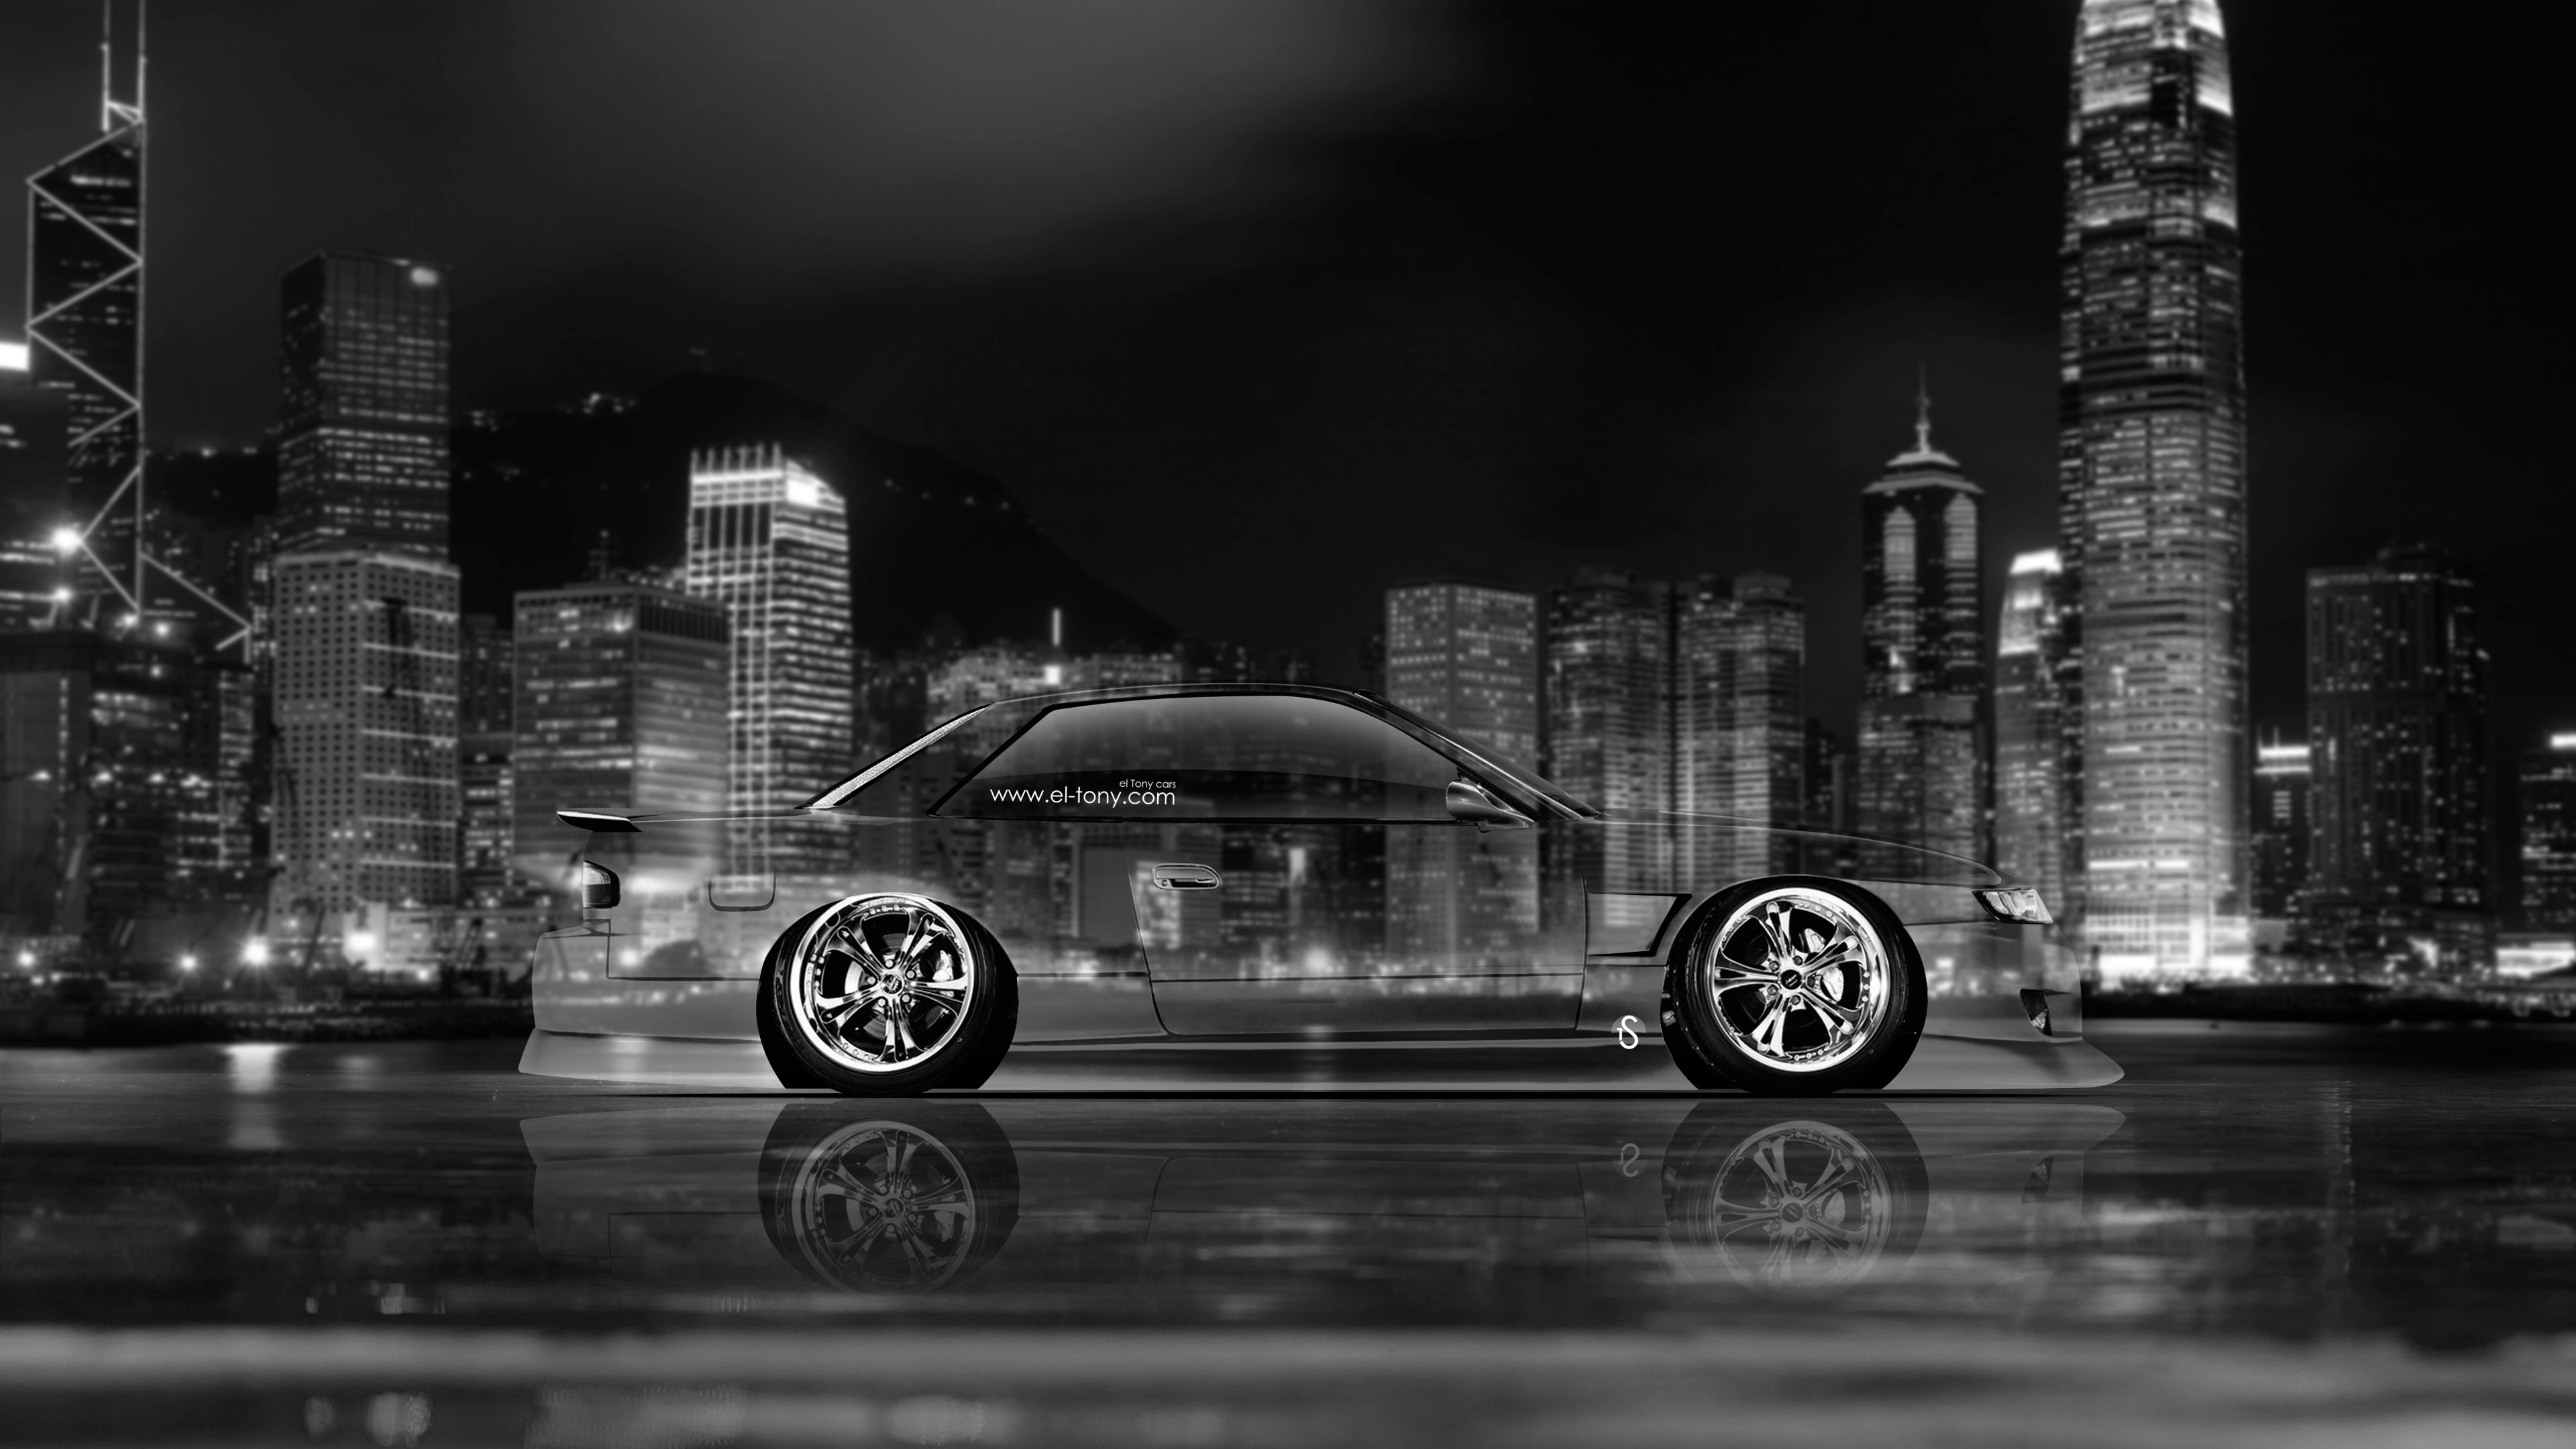 JDM Tuning Side Crystal City Car 2015 Black White Colors 4K Wallpapers